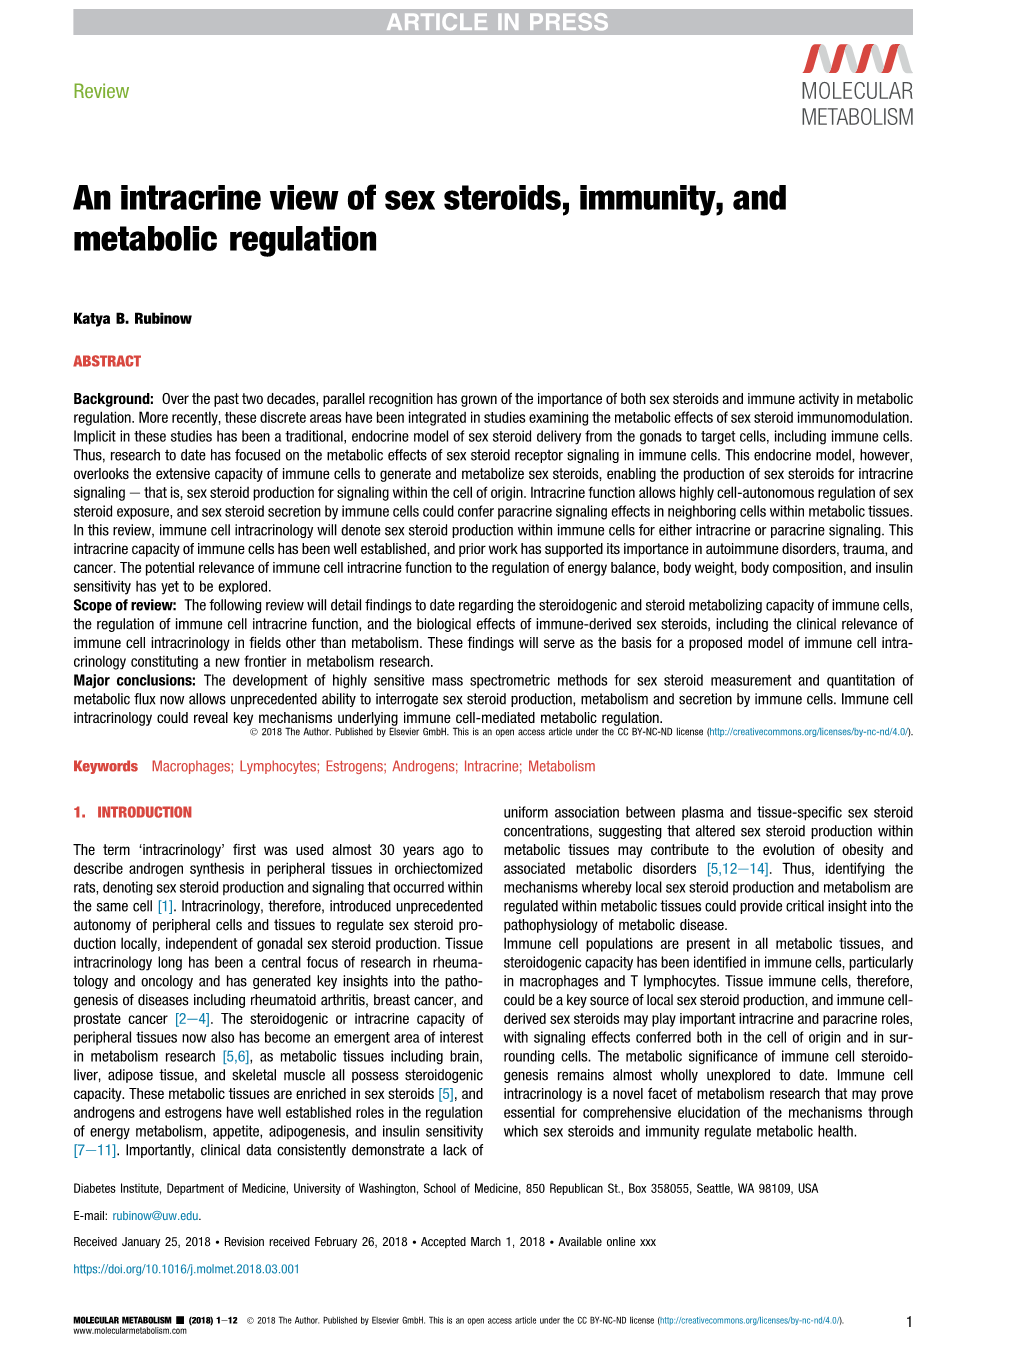 An Intracrine View of Sex Steroids, Immunity, and Metabolic Regulation